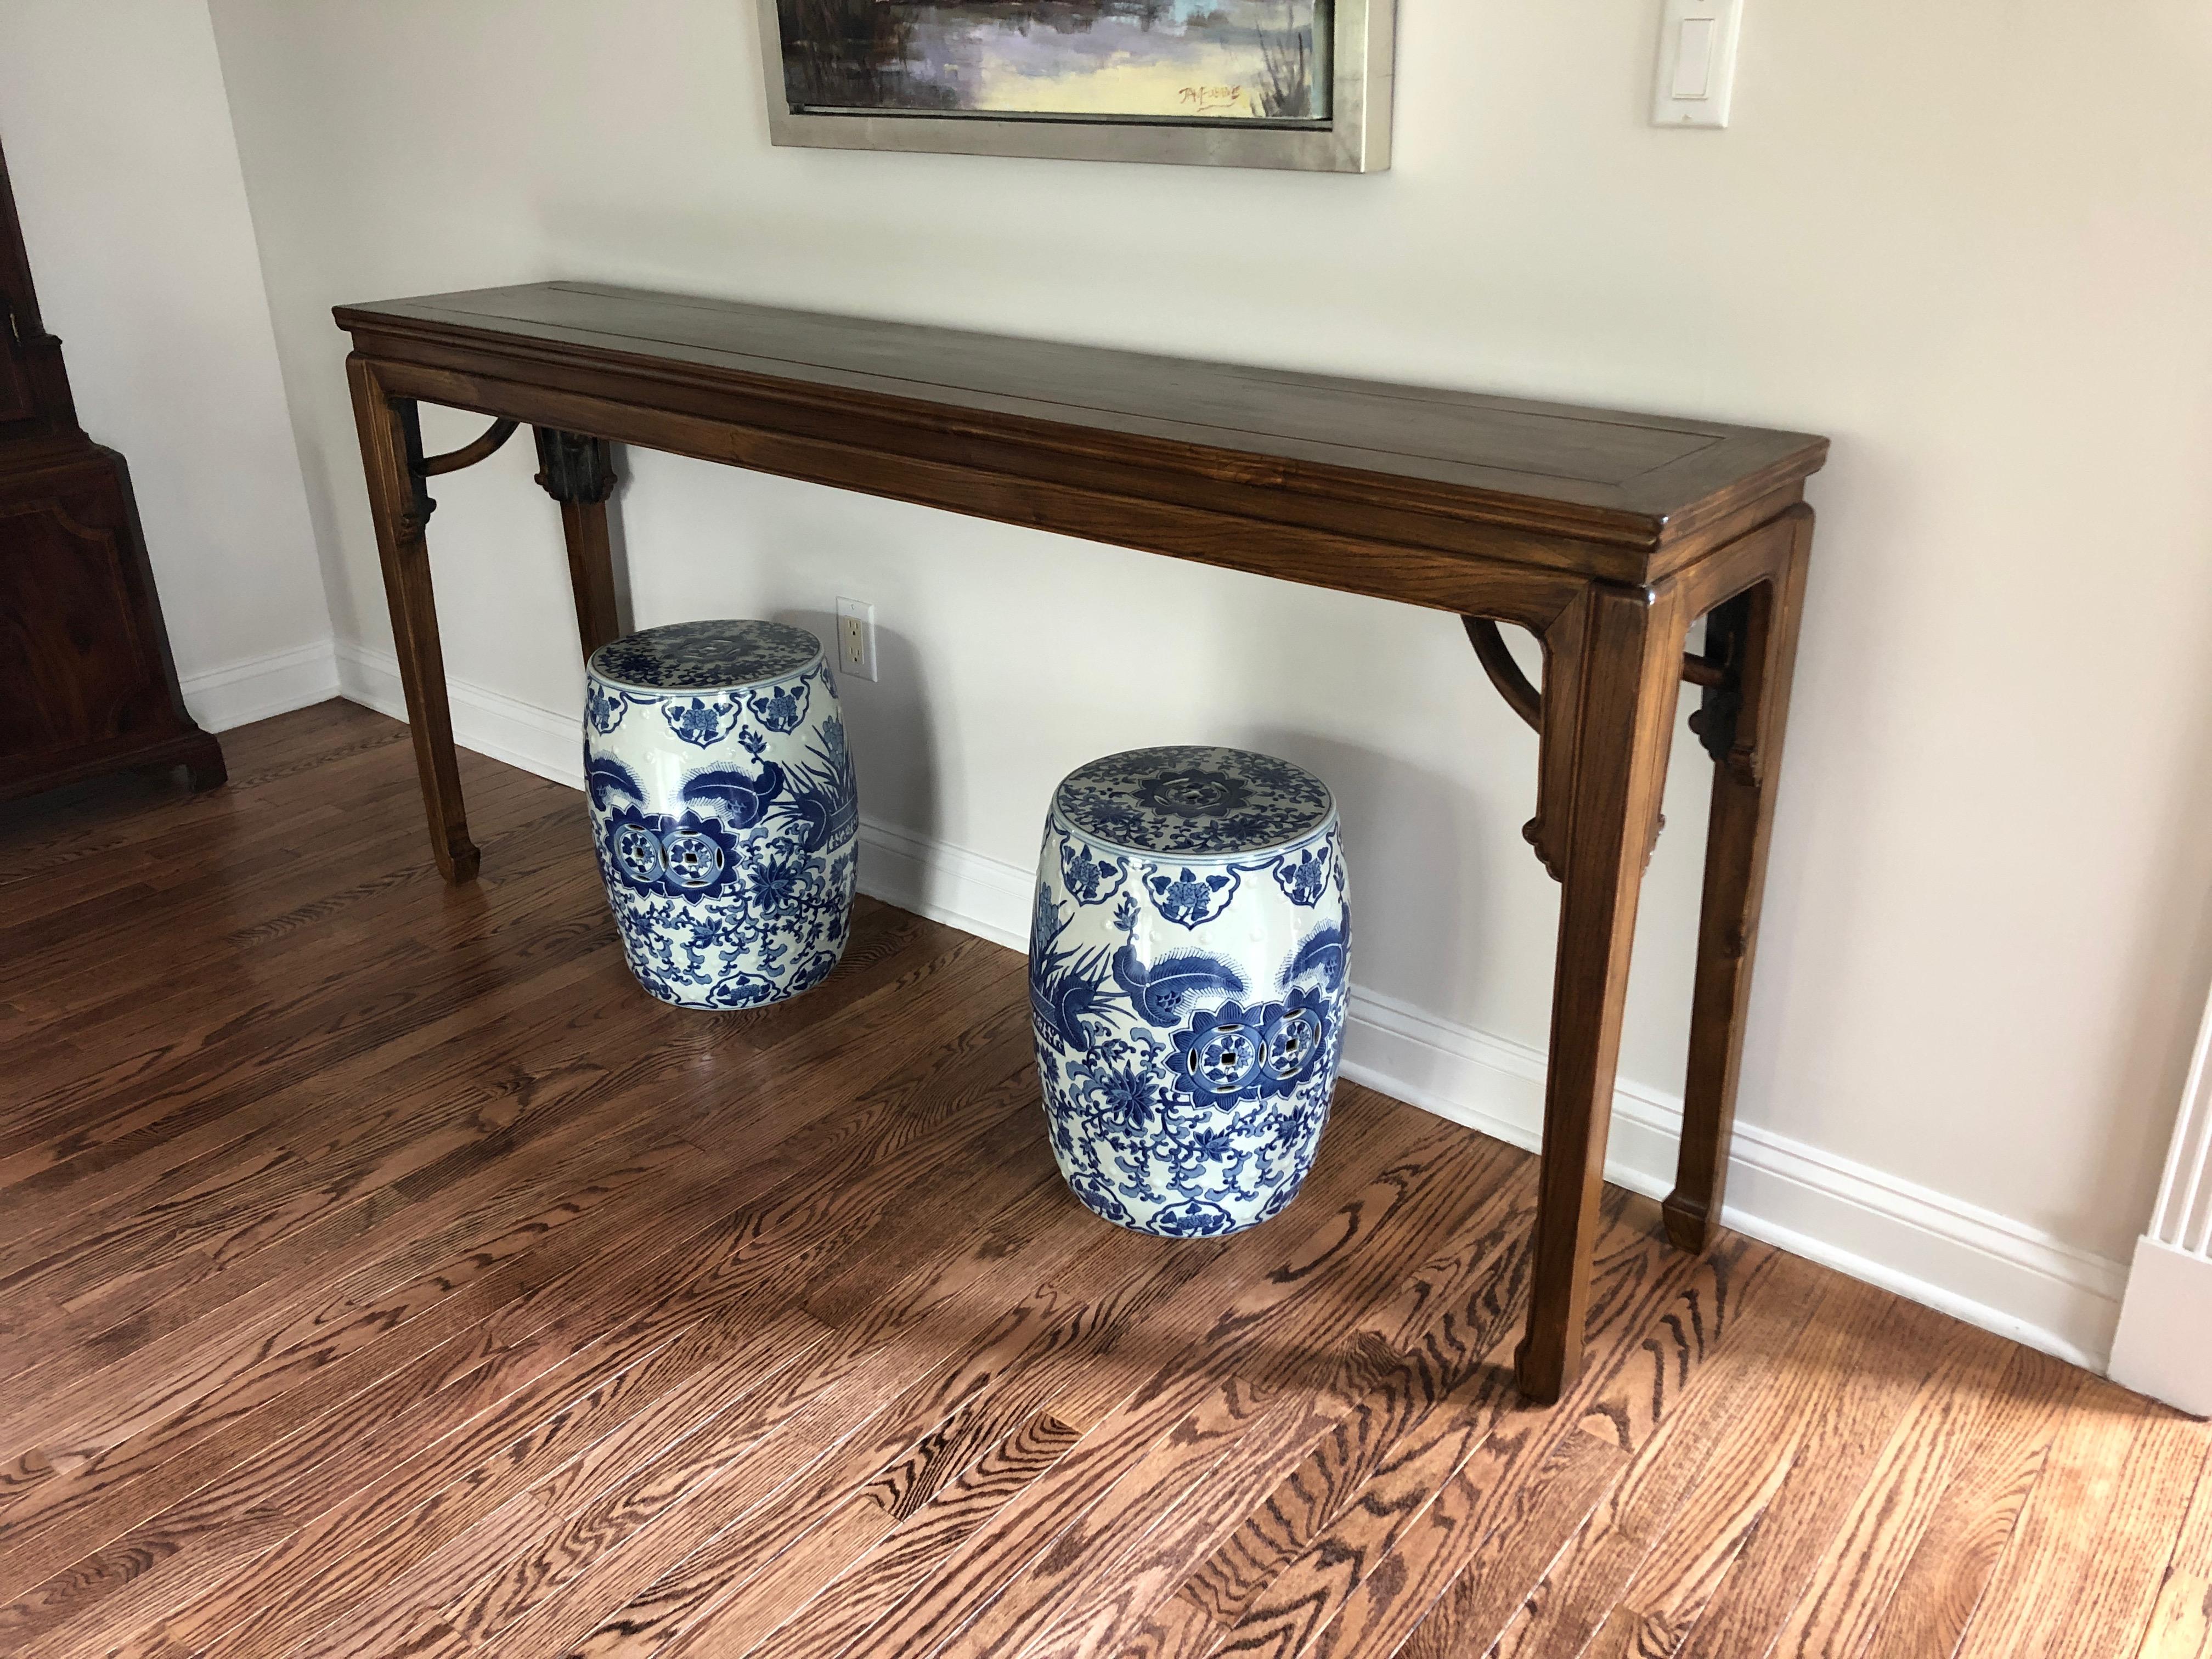 Elegant long narrow hardwood Asian console having beautiful grain, brass decorative supports and stunning classically shaped Chinese legs. Comes with Certificate of Authenticity from Tomlinson, Singapore.